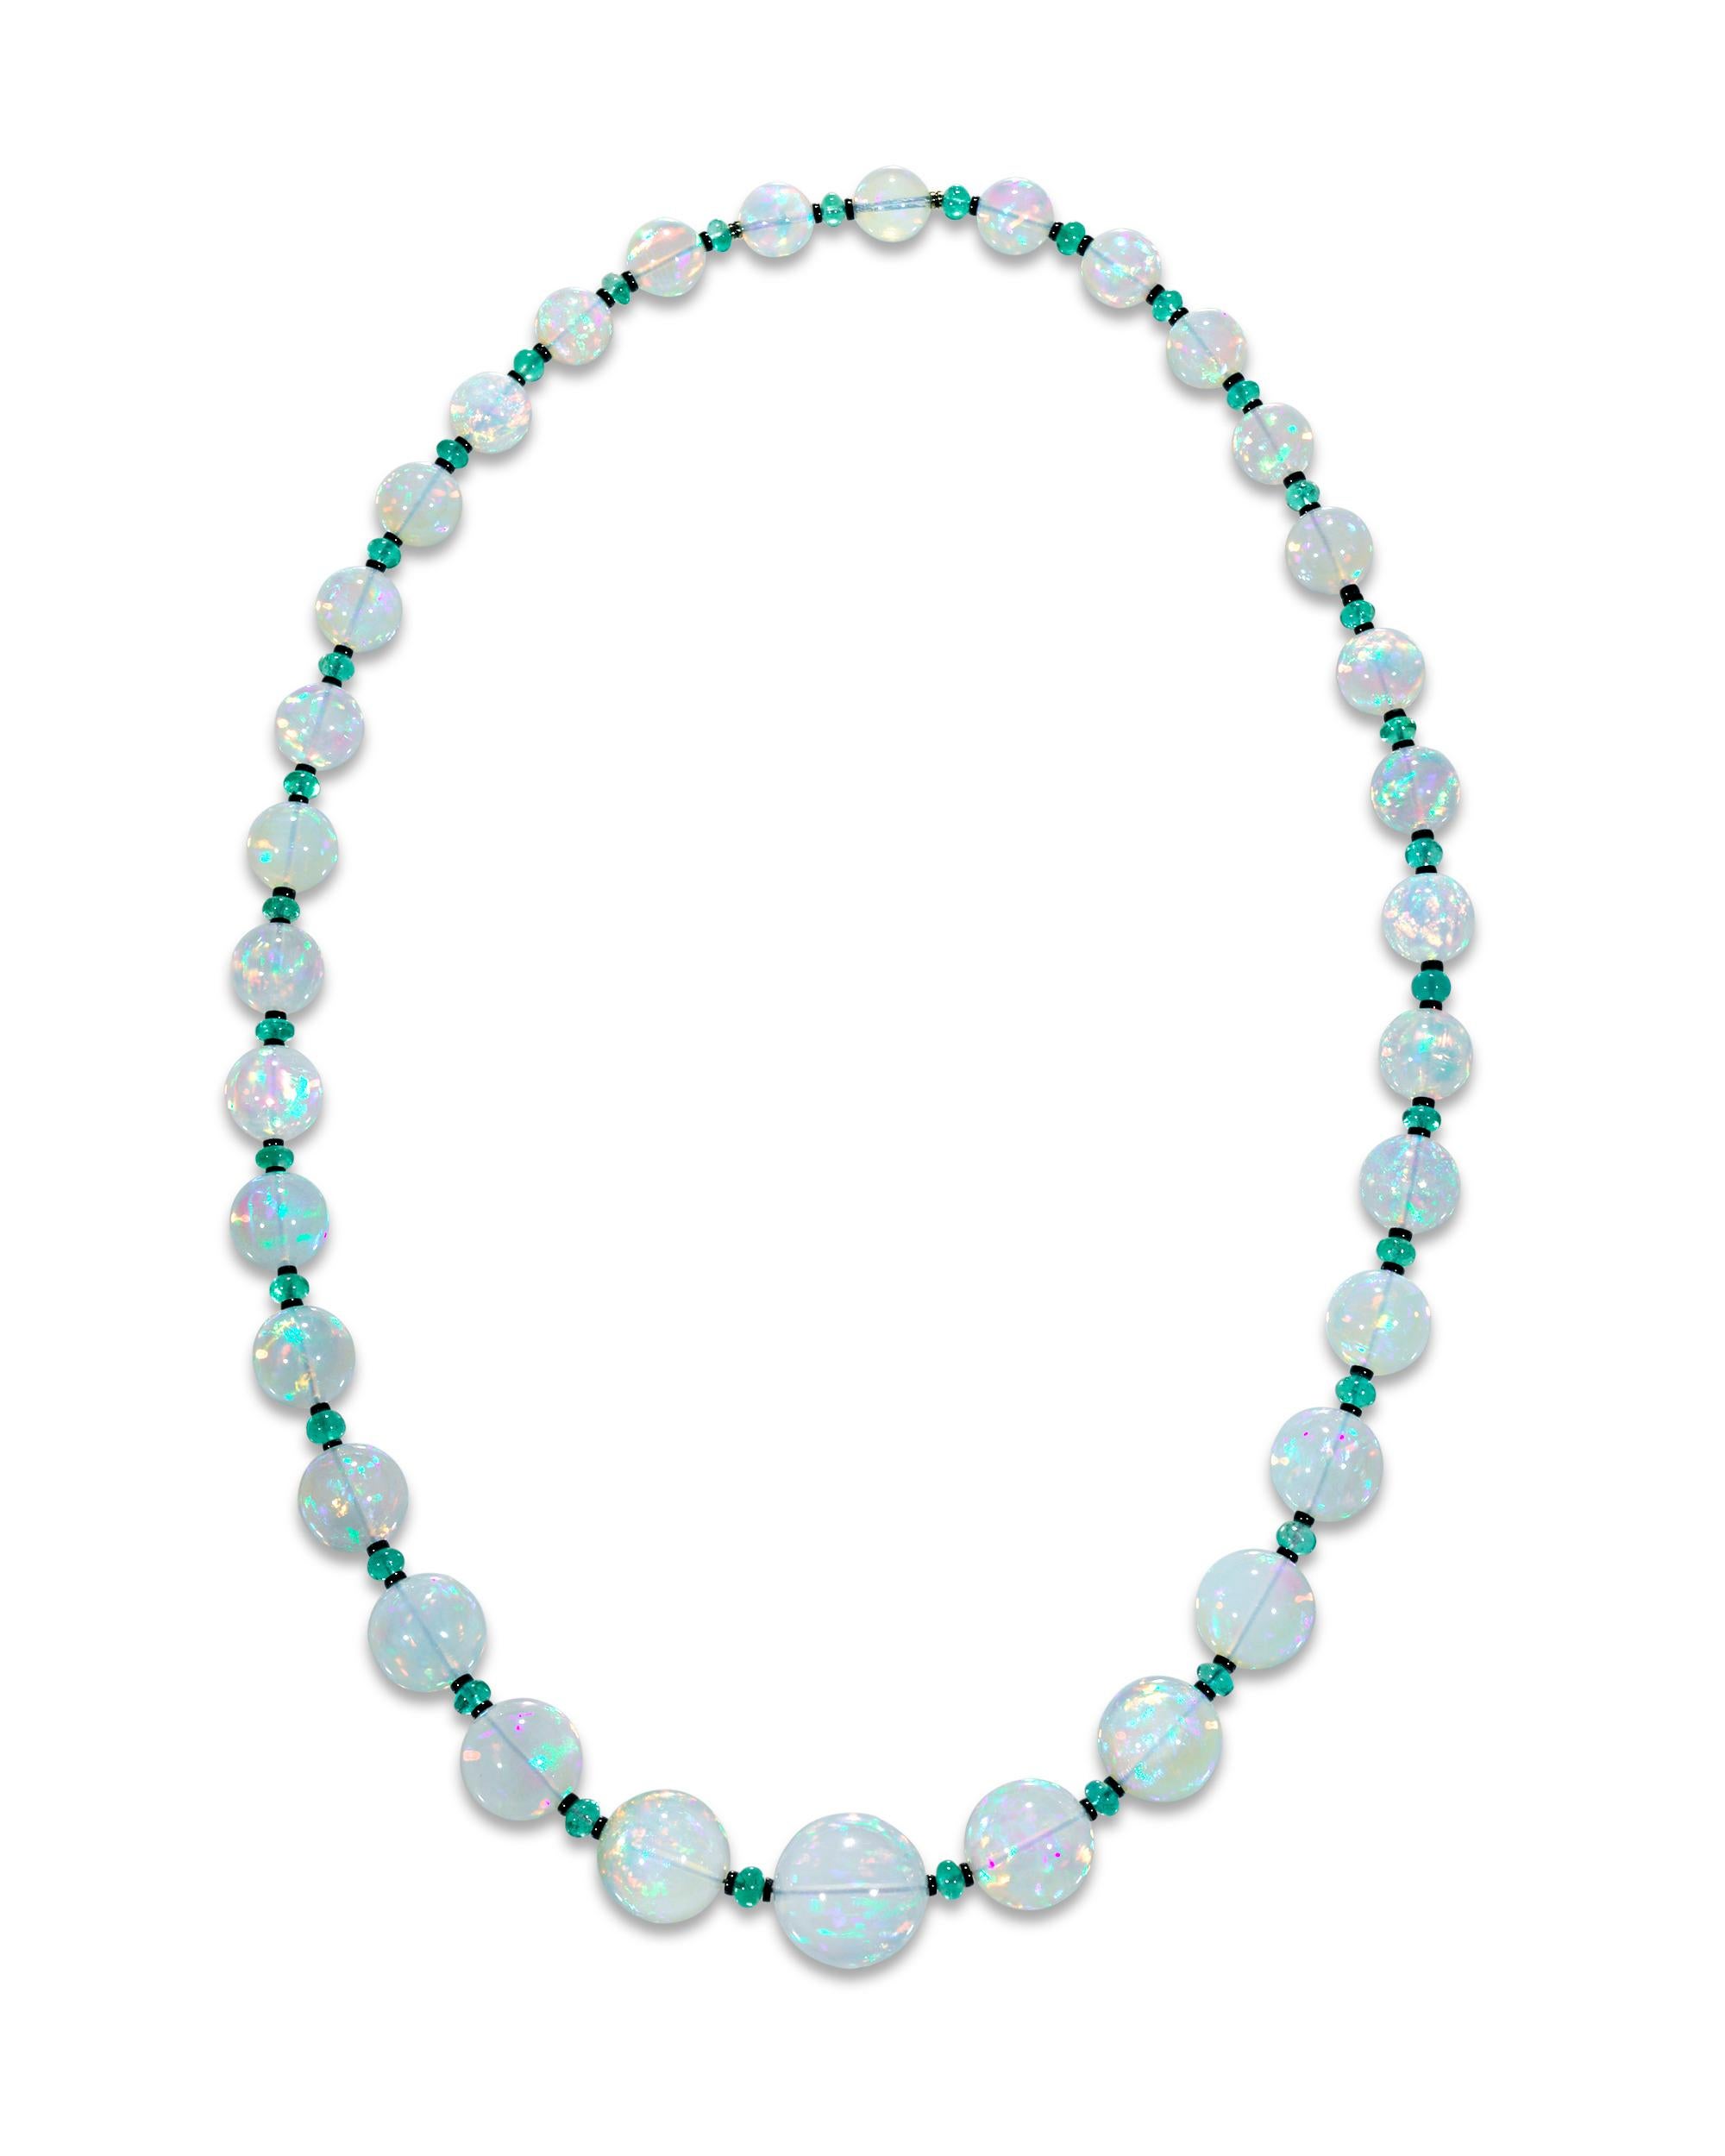 Thirty-three monumental Ethiopian opal beads totaling approximately 436.00 carats comprise this mesmerizing necklace. The graduated gems are not only impressive in size, but each exhibits a high level of translucence and extraordinary play of color.